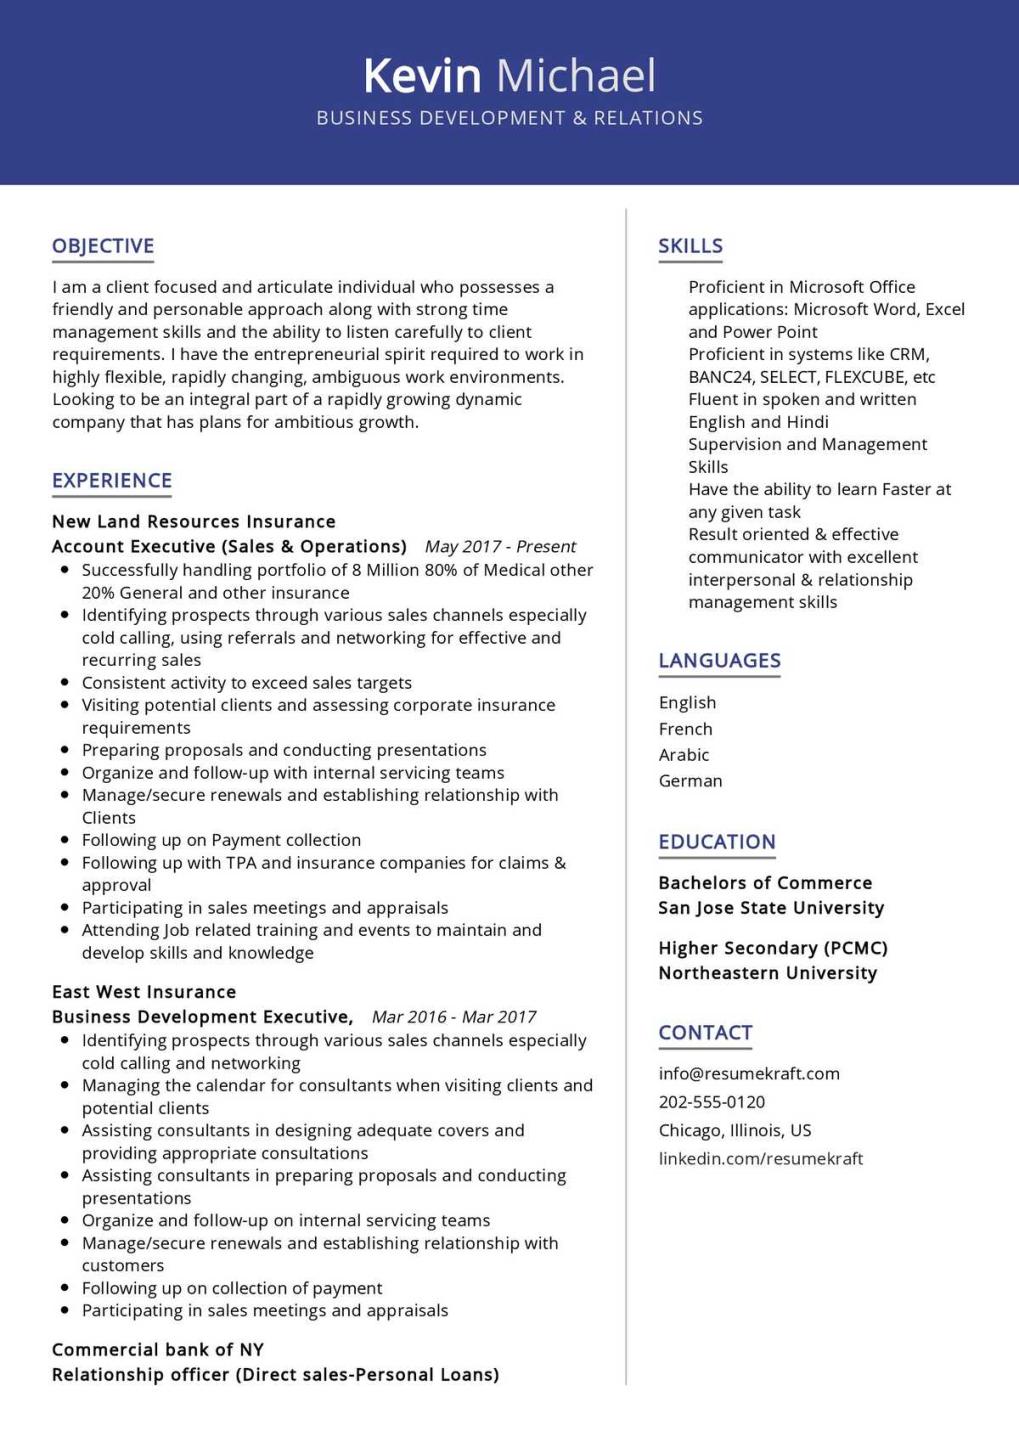 How Can I Use My Resume To Get Noticed By Recruiters?